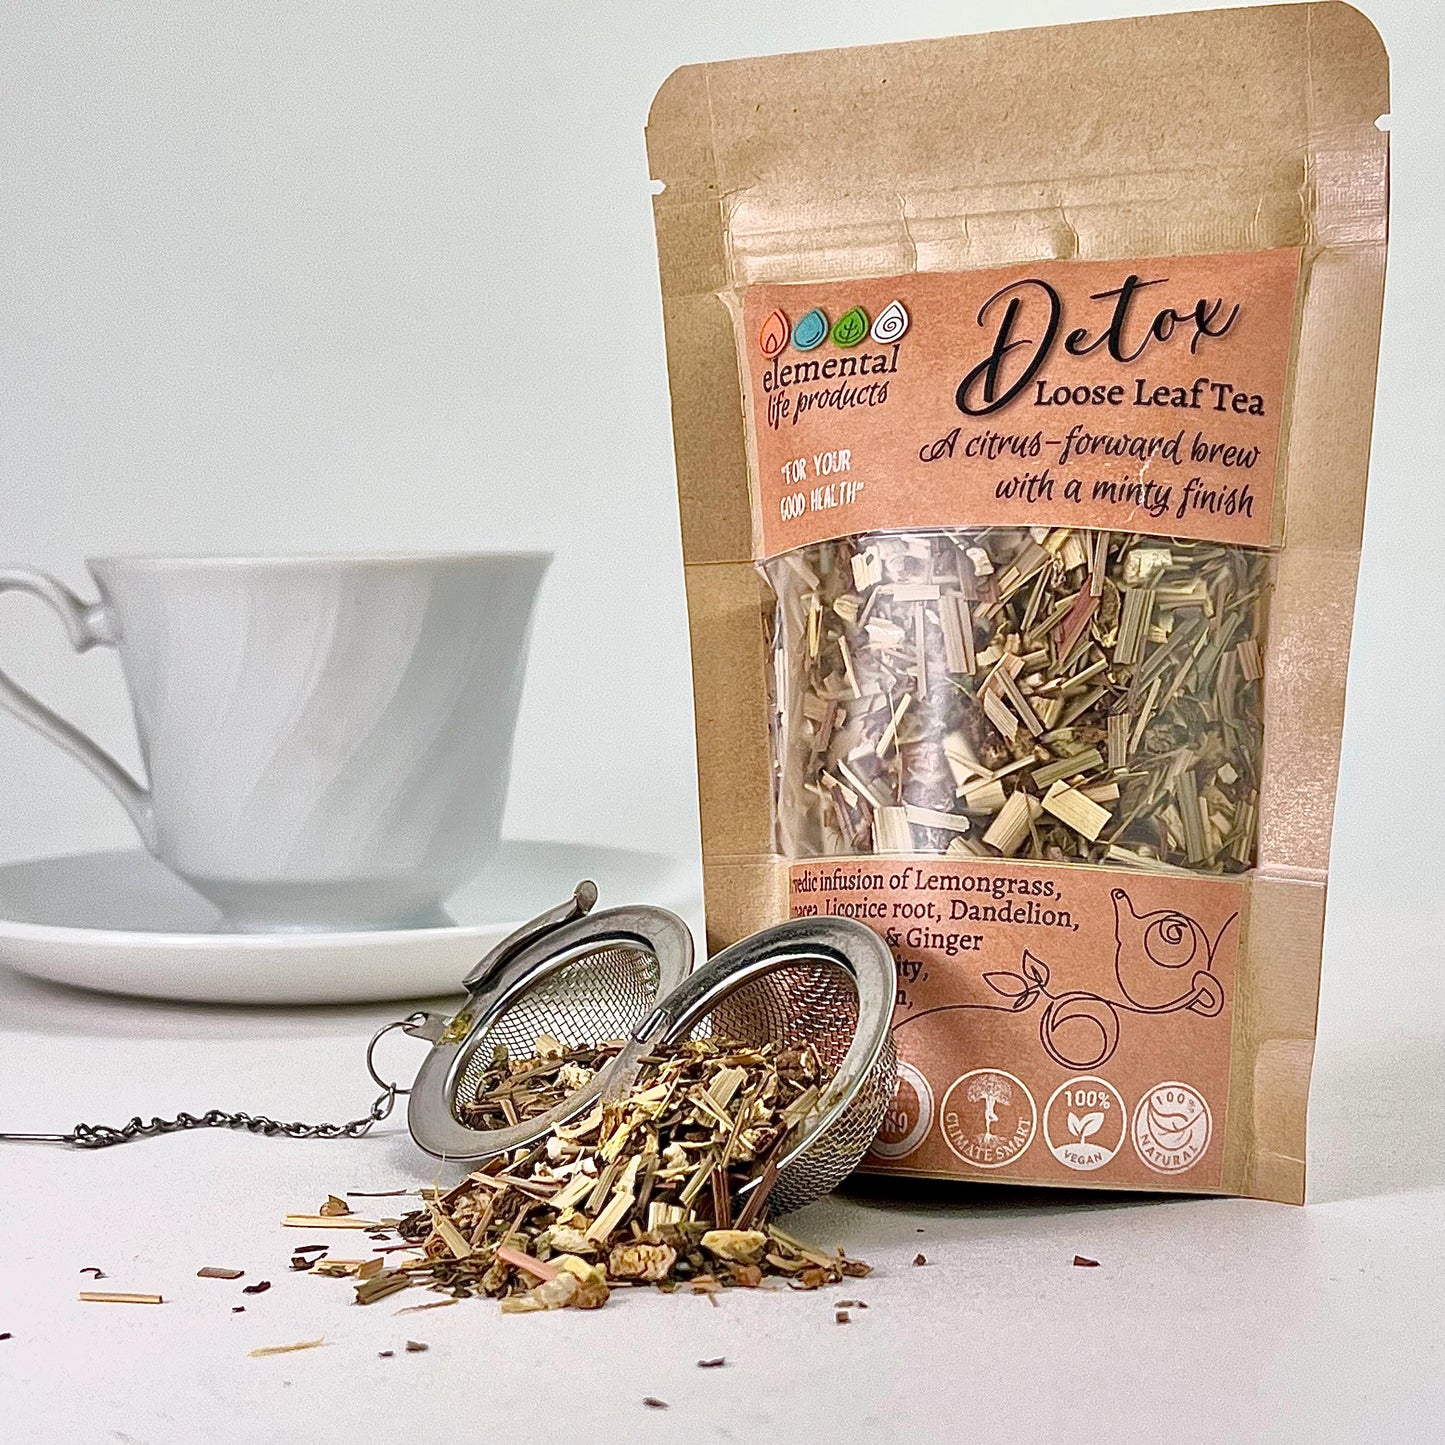 Elemental life product's Detox tea with raw ingredients of Lemongrass, Echinacea, Licorice, dandelion with a tea ball and cup